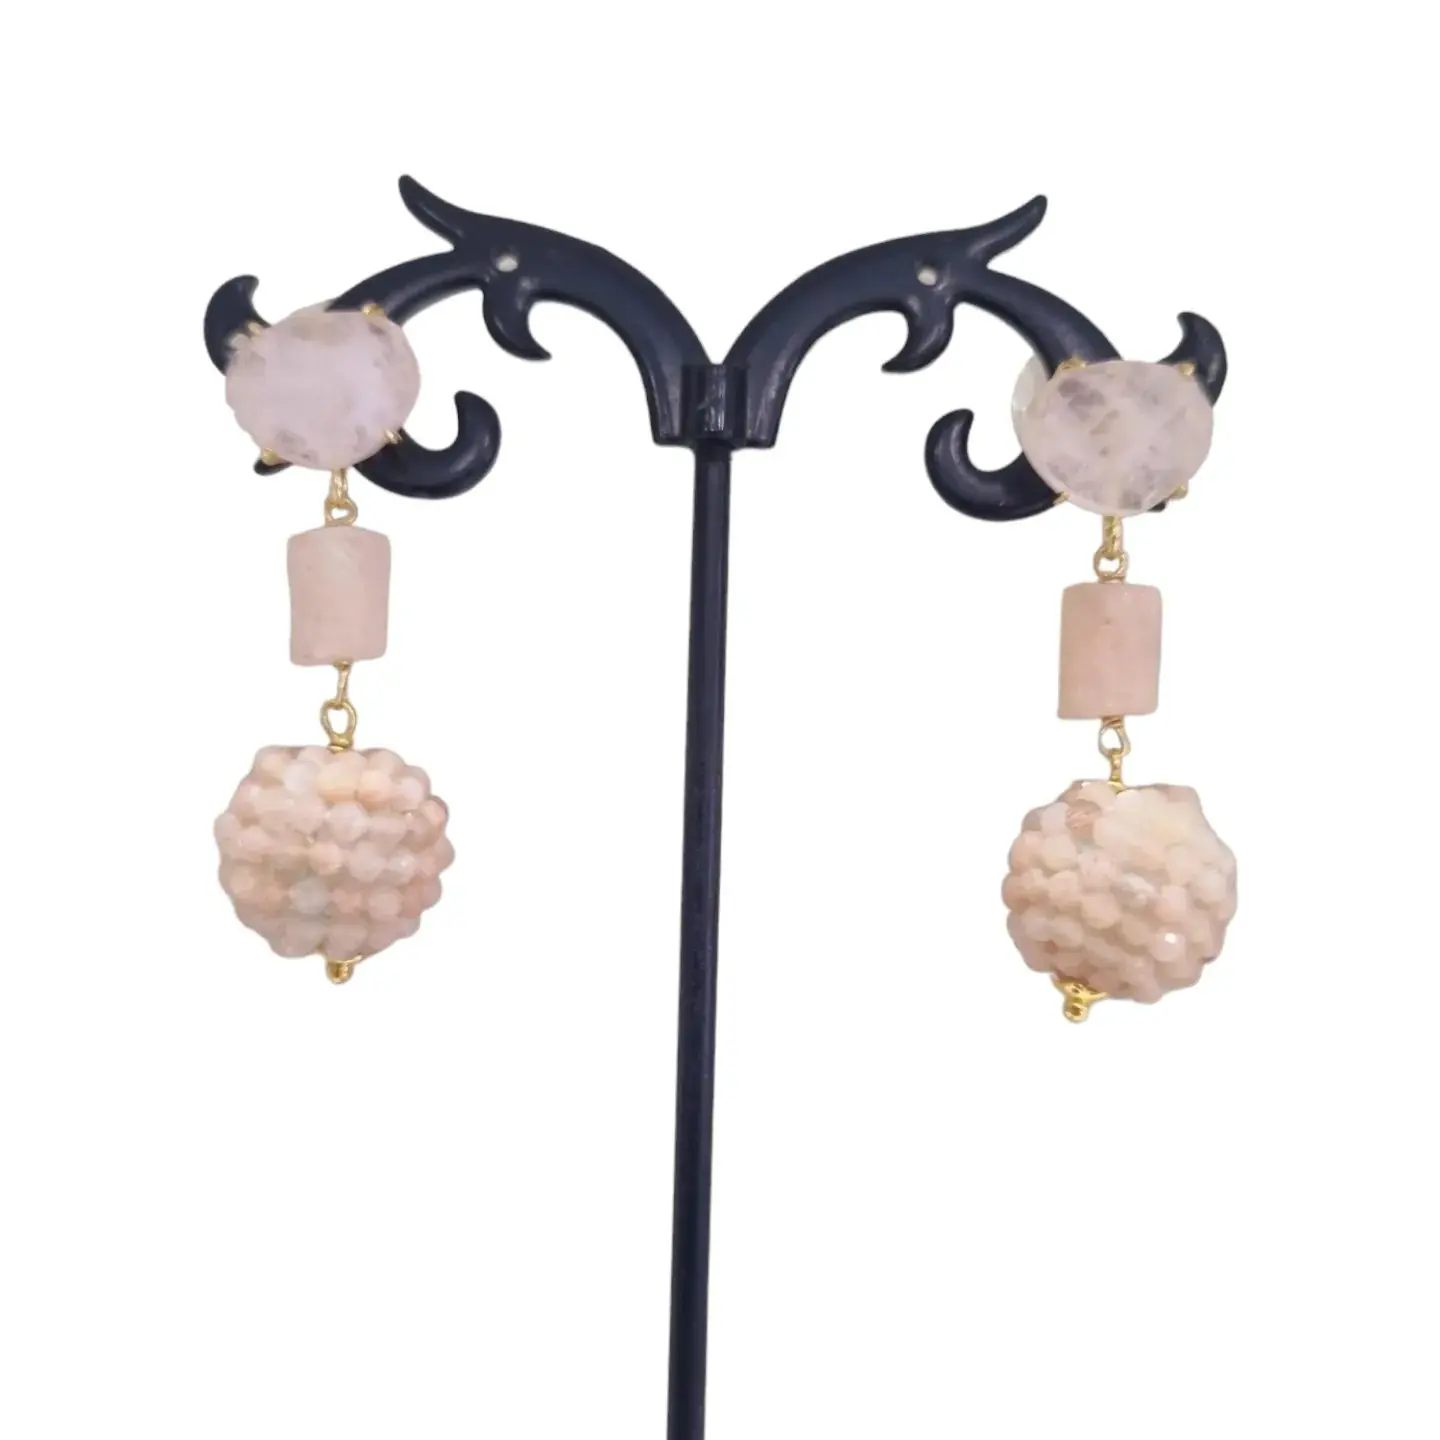 Rose quartz and cat's eye earrings – Light and comfortable Weight 4.6 g Length 4.5cm